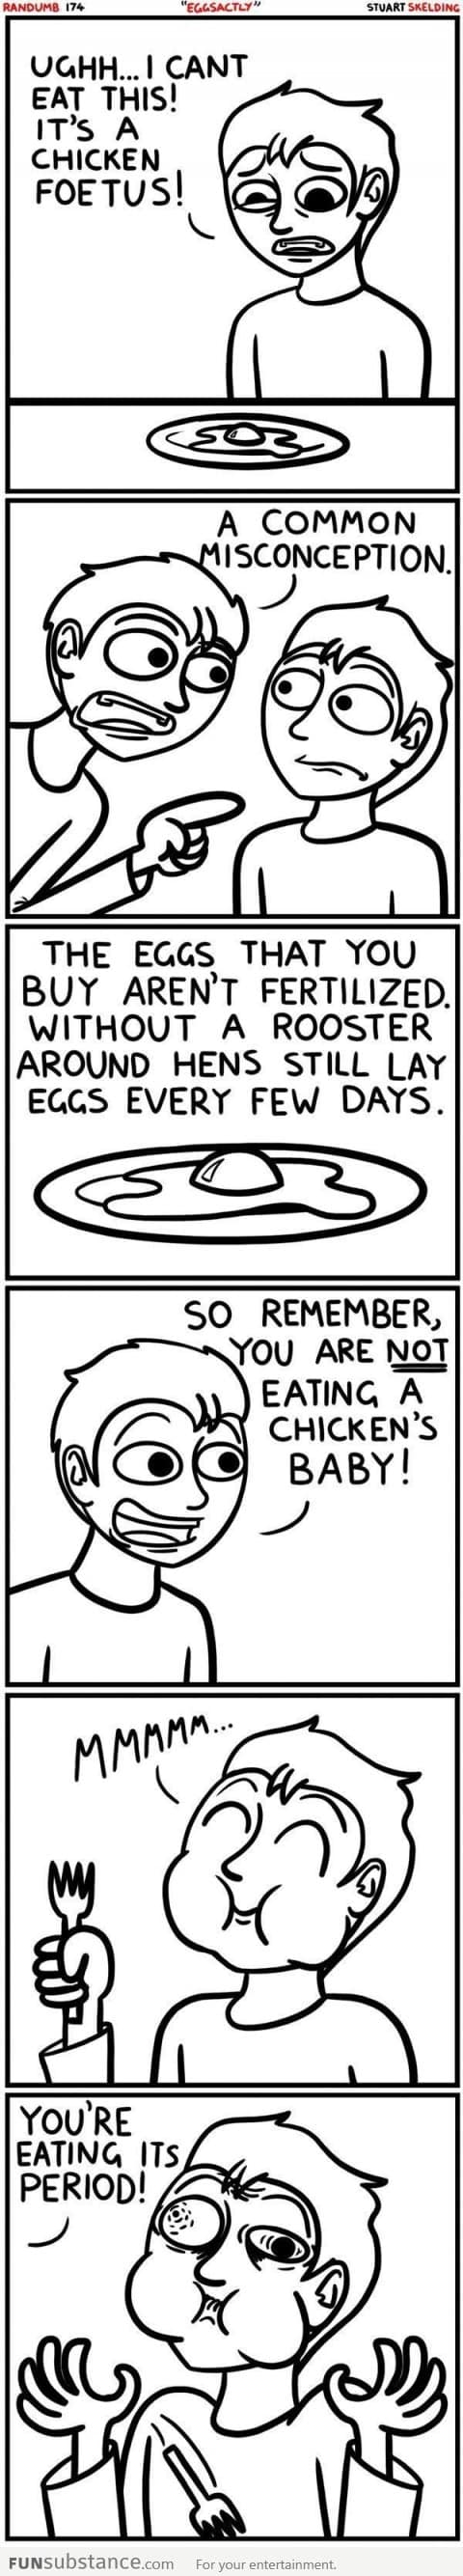 Eating eggs doesn't mean eating a chicken's baby